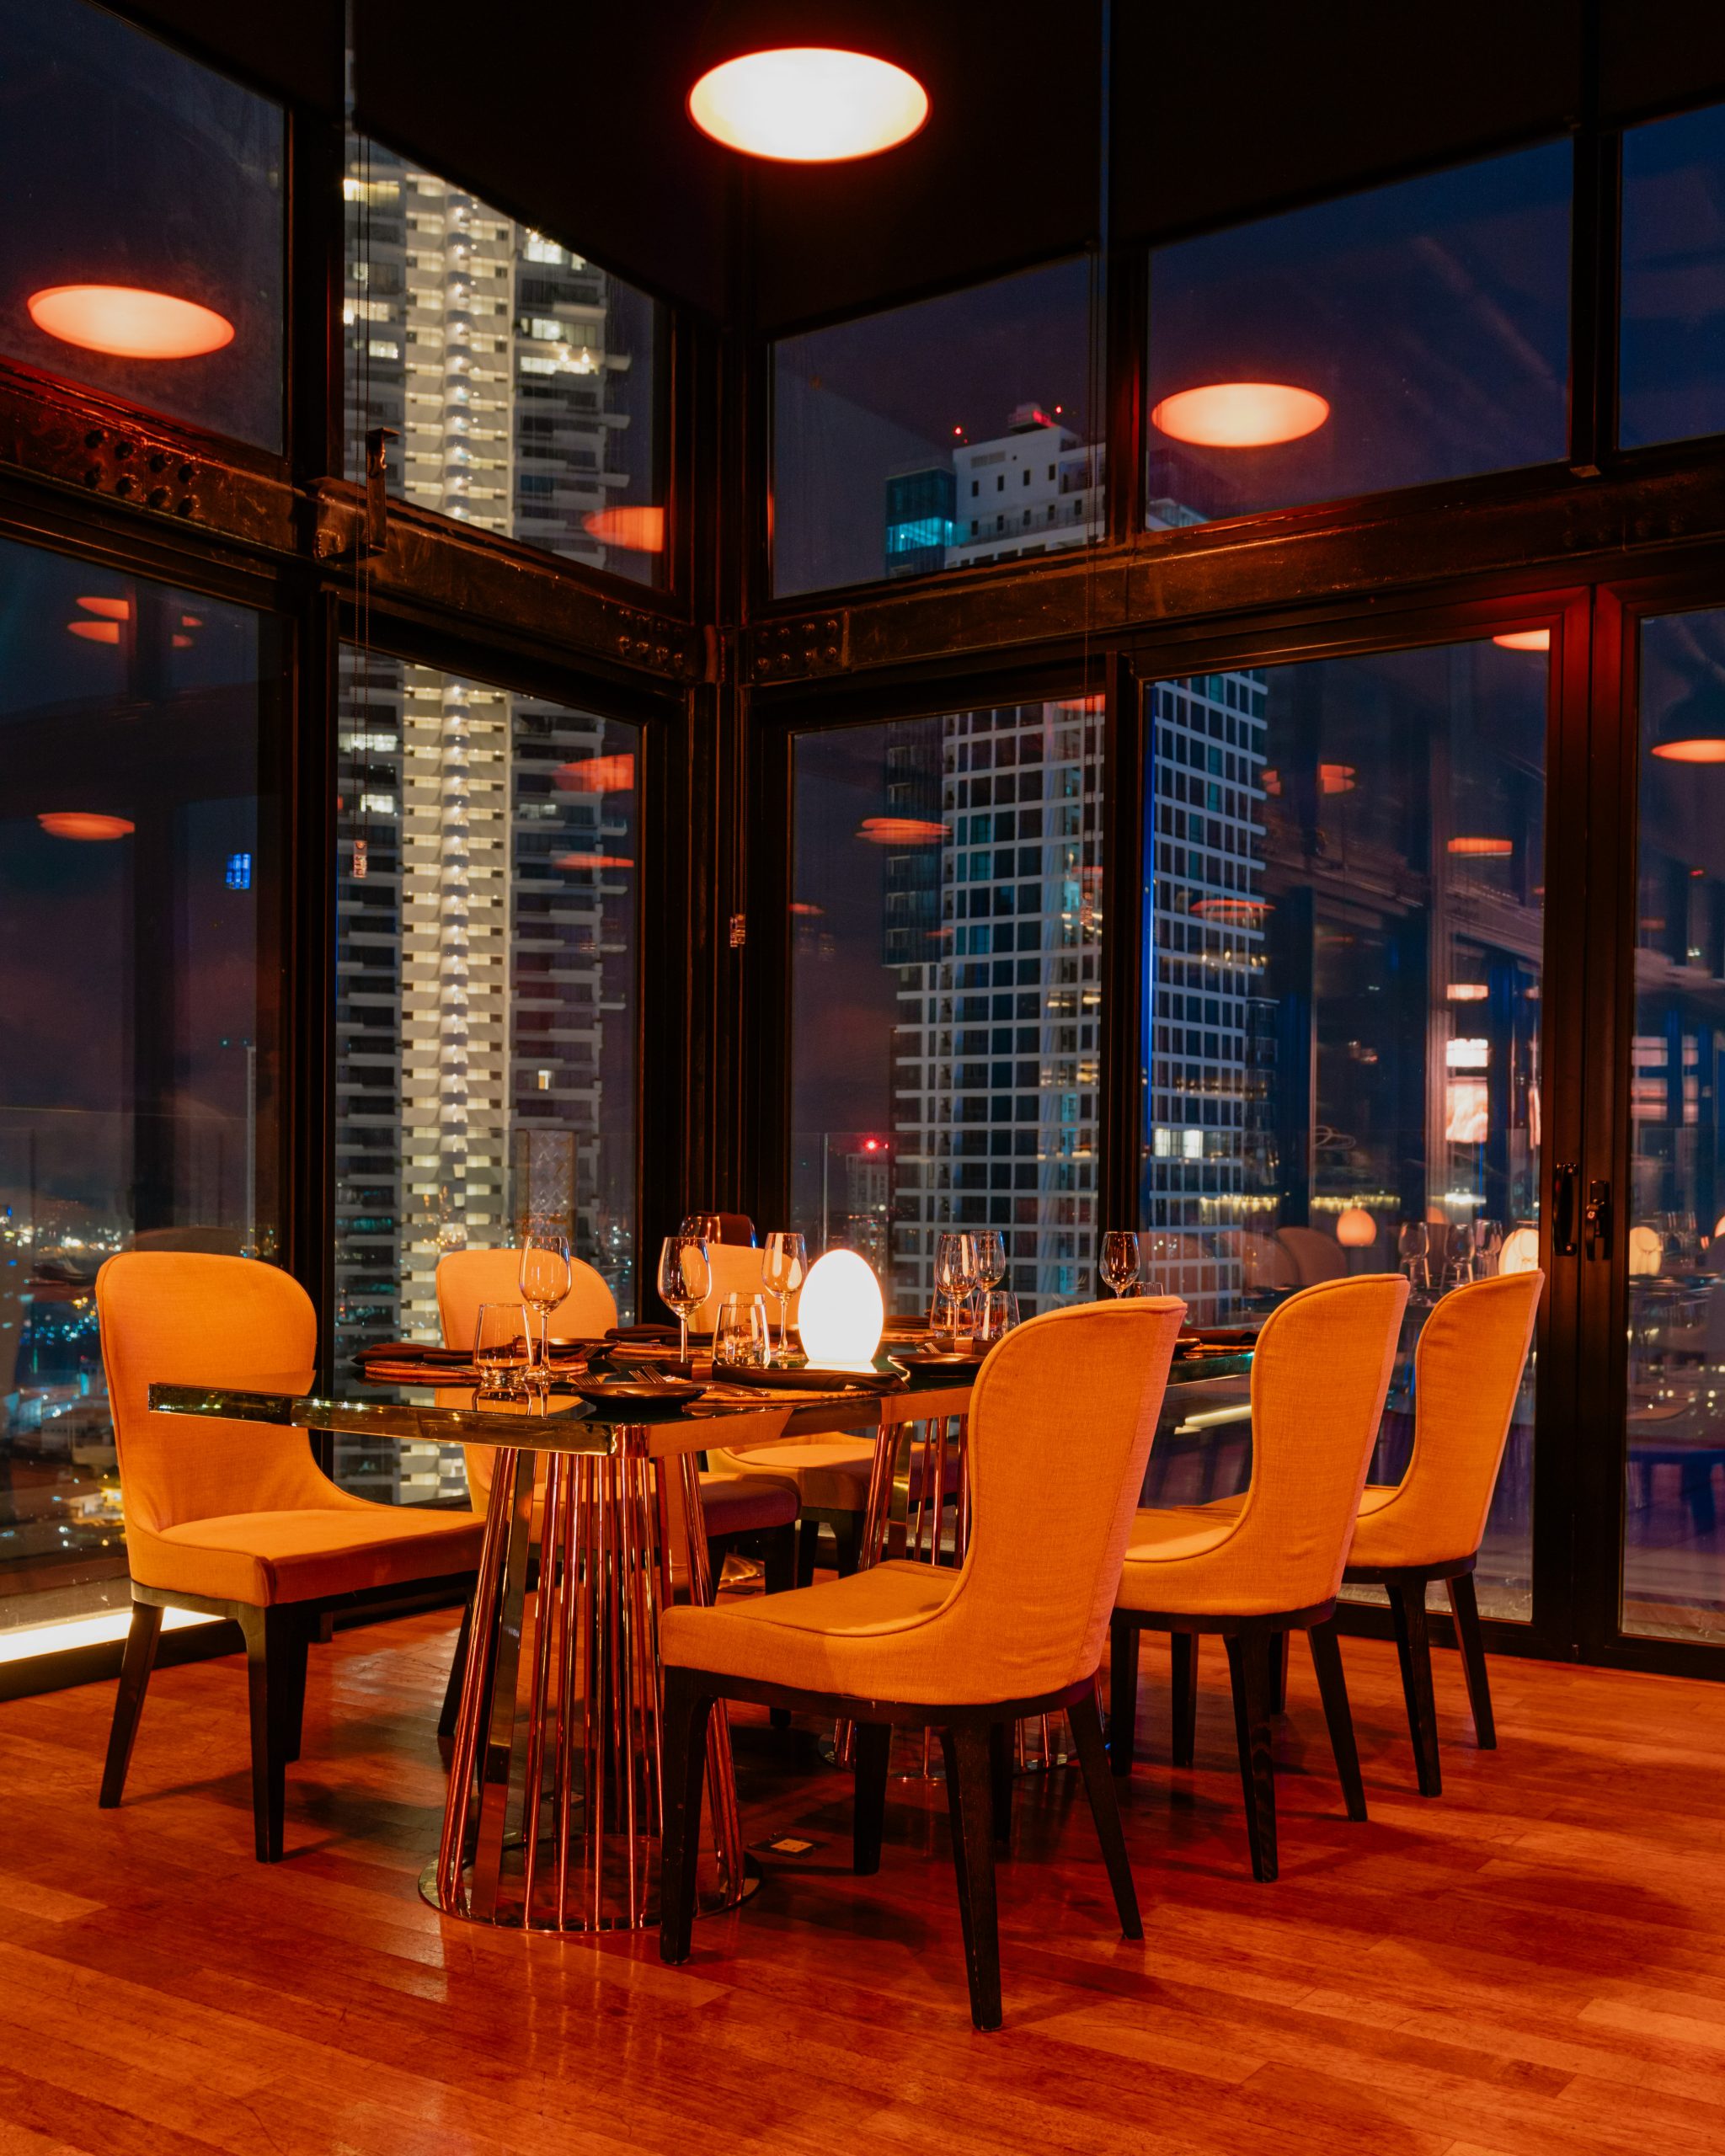 Dining setup overlooking the city